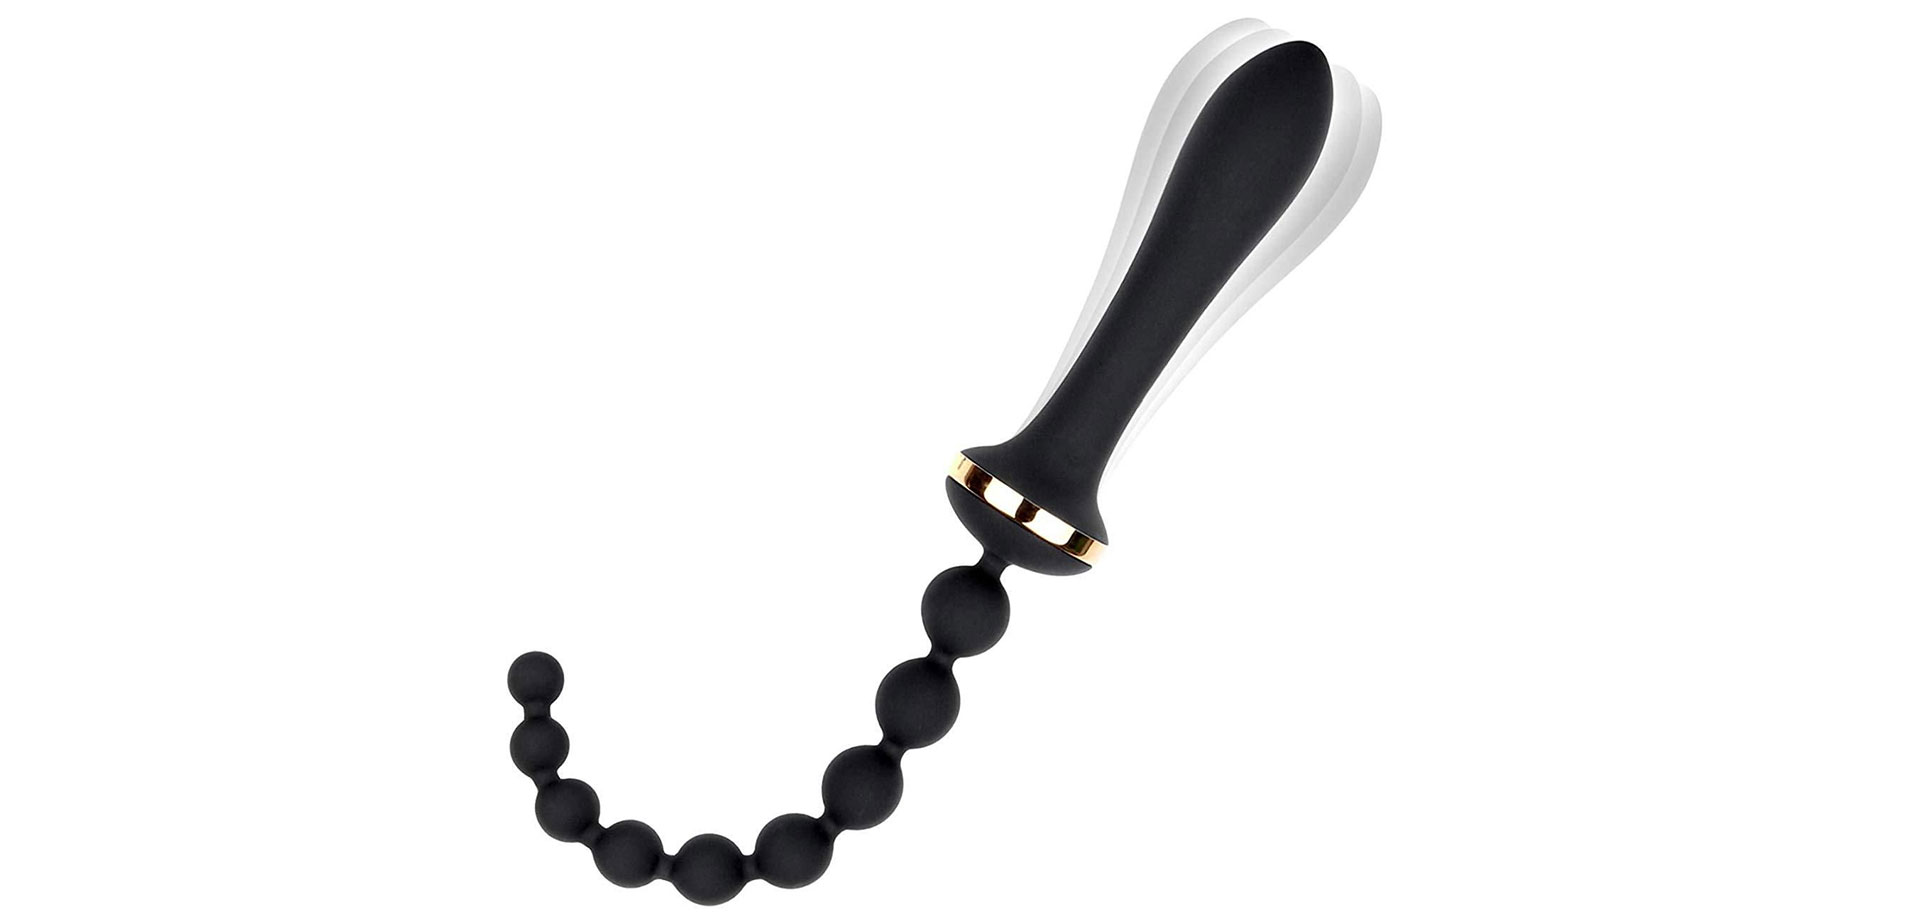 Remote controlled anal vibrator.